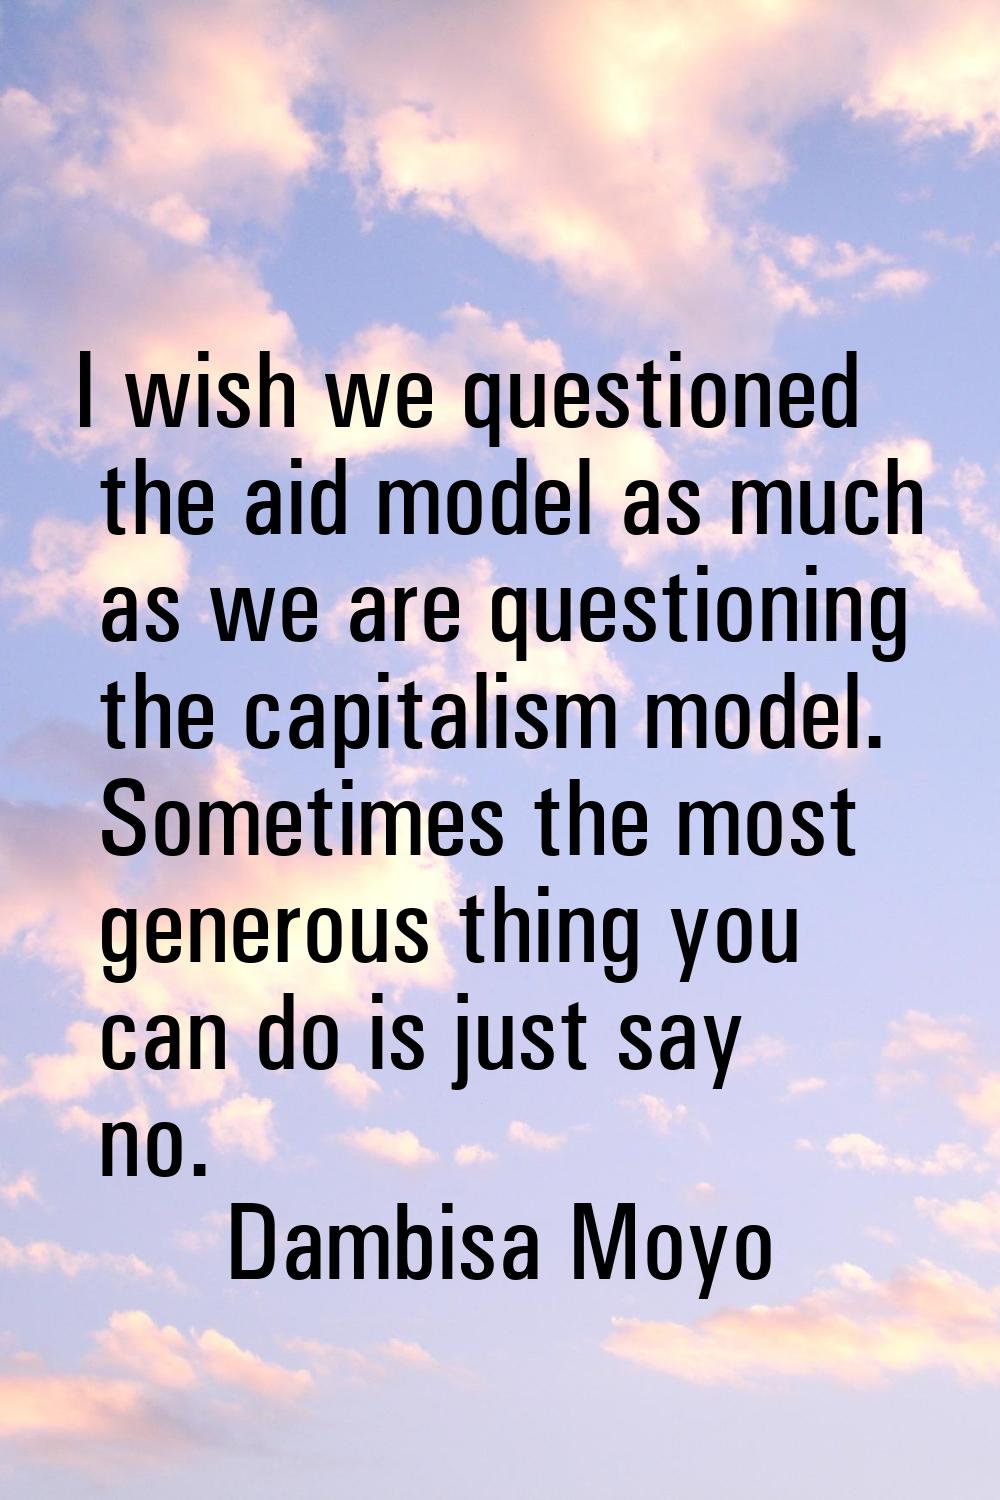 I wish we questioned the aid model as much as we are questioning the capitalism model. Sometimes th